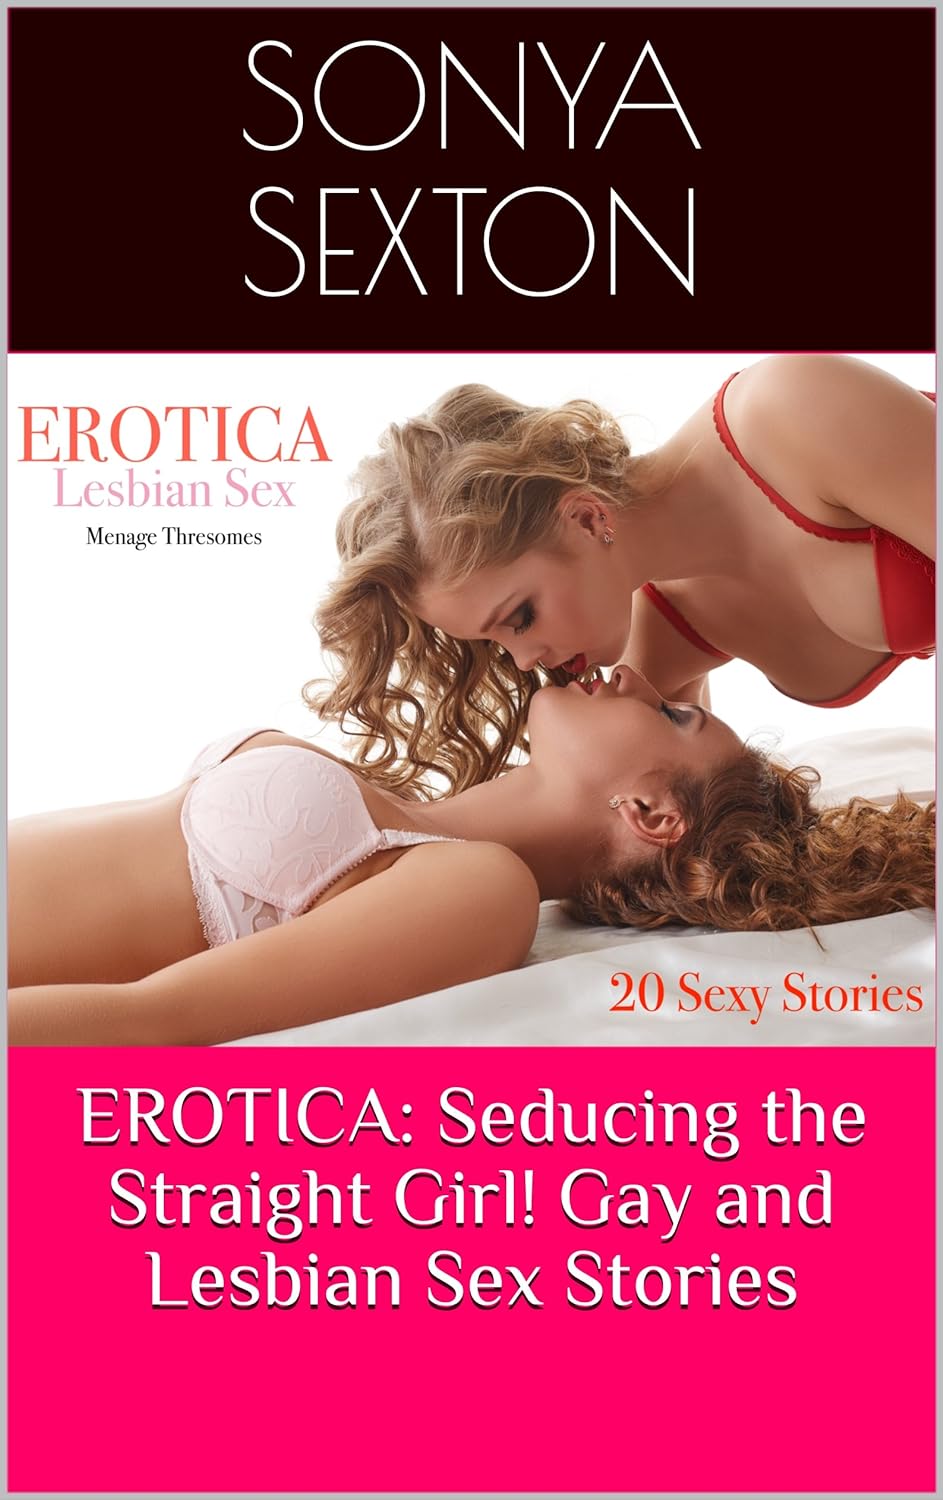 Erotic short stories search